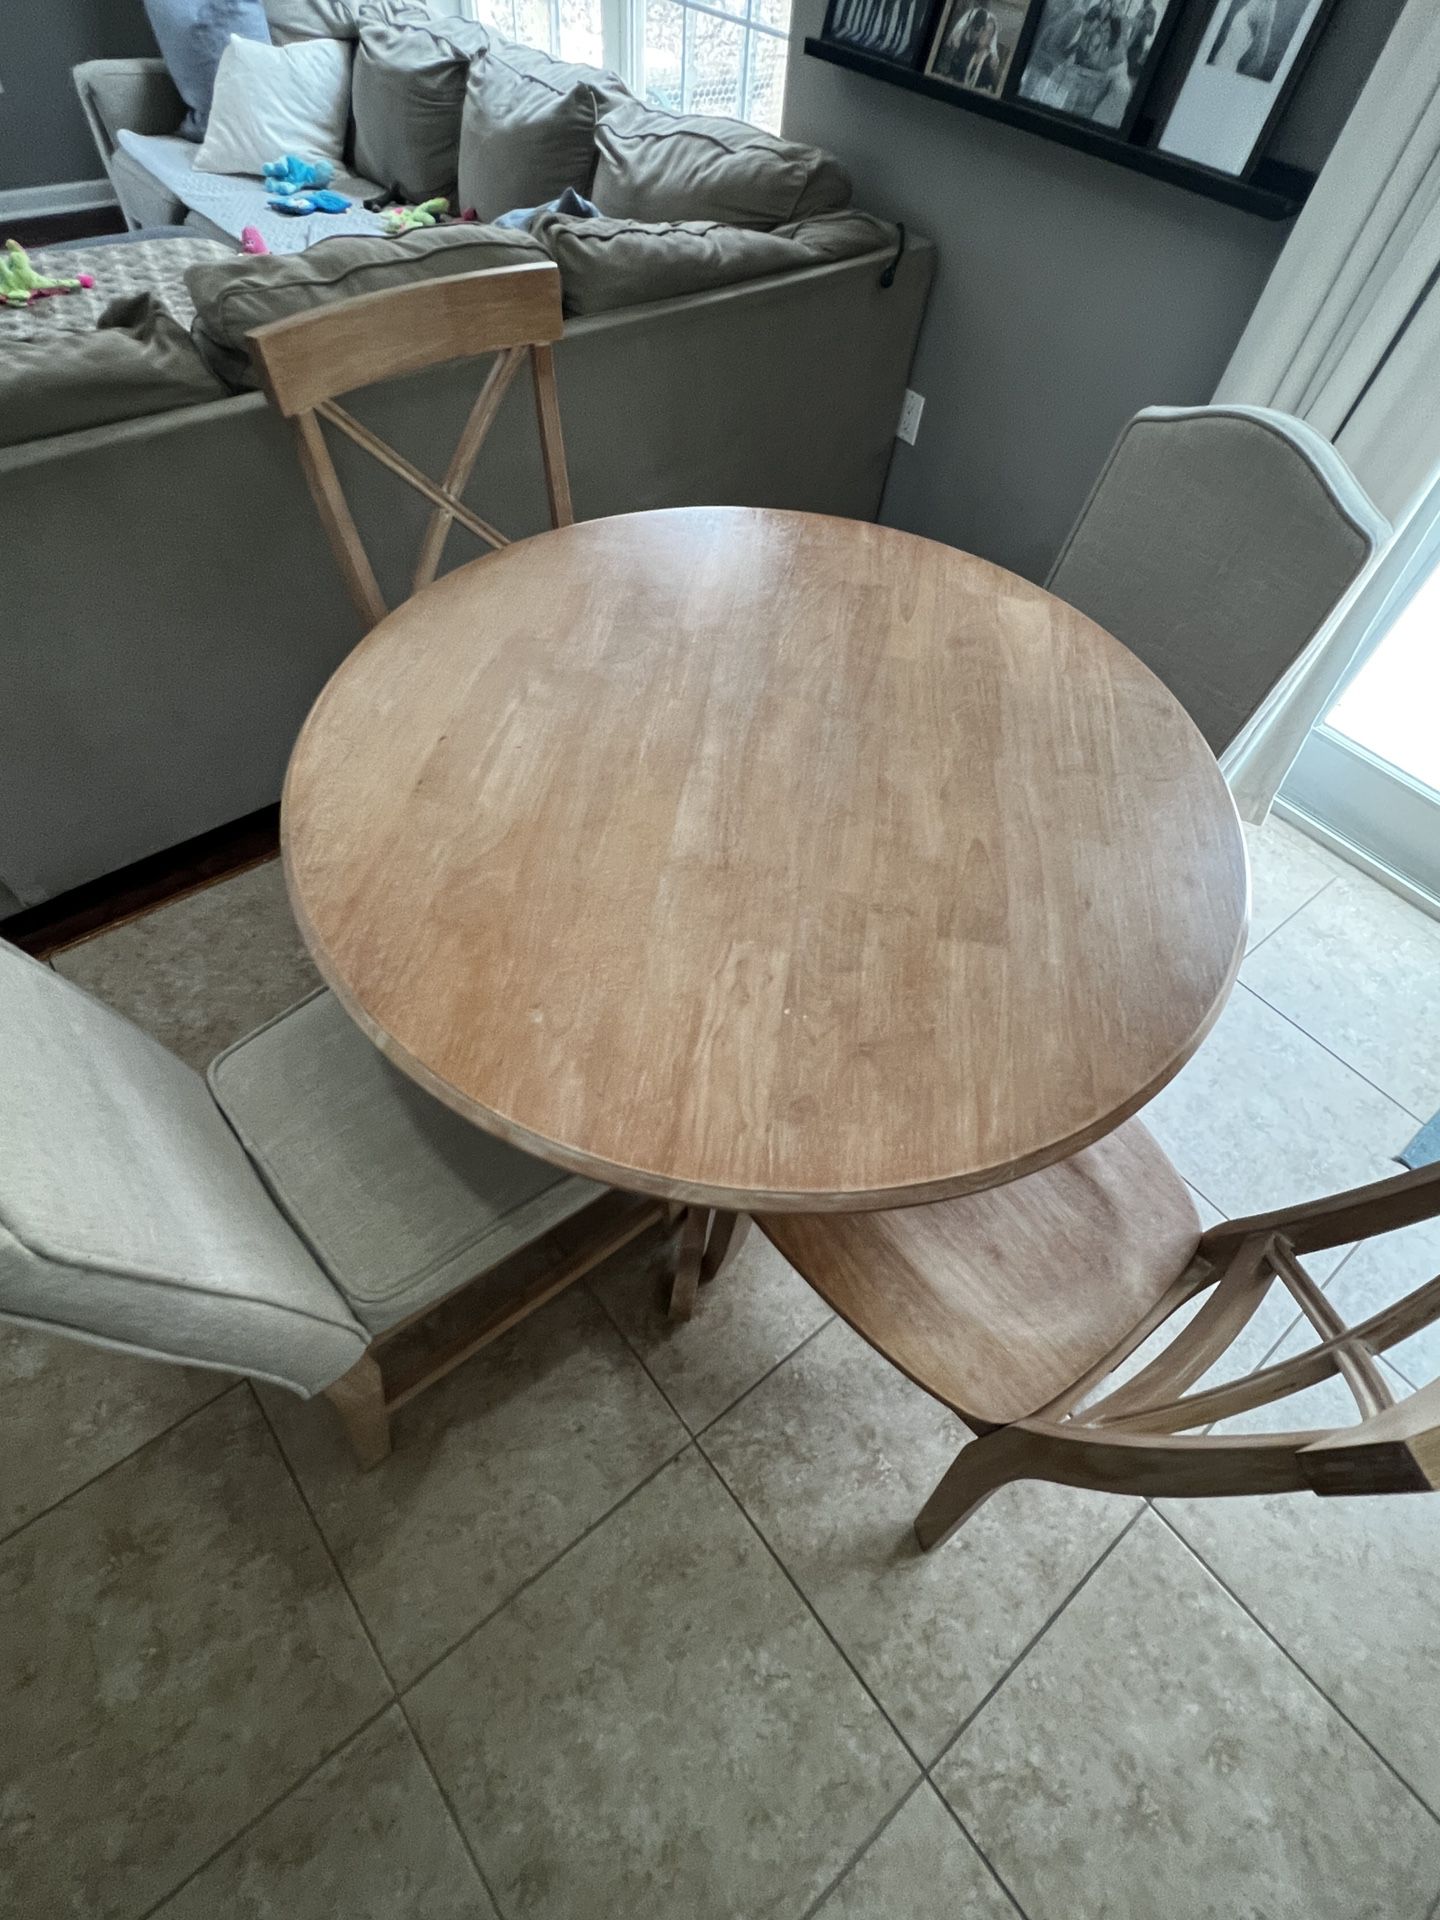 5 Piece Round Dining set-gone this weekend!